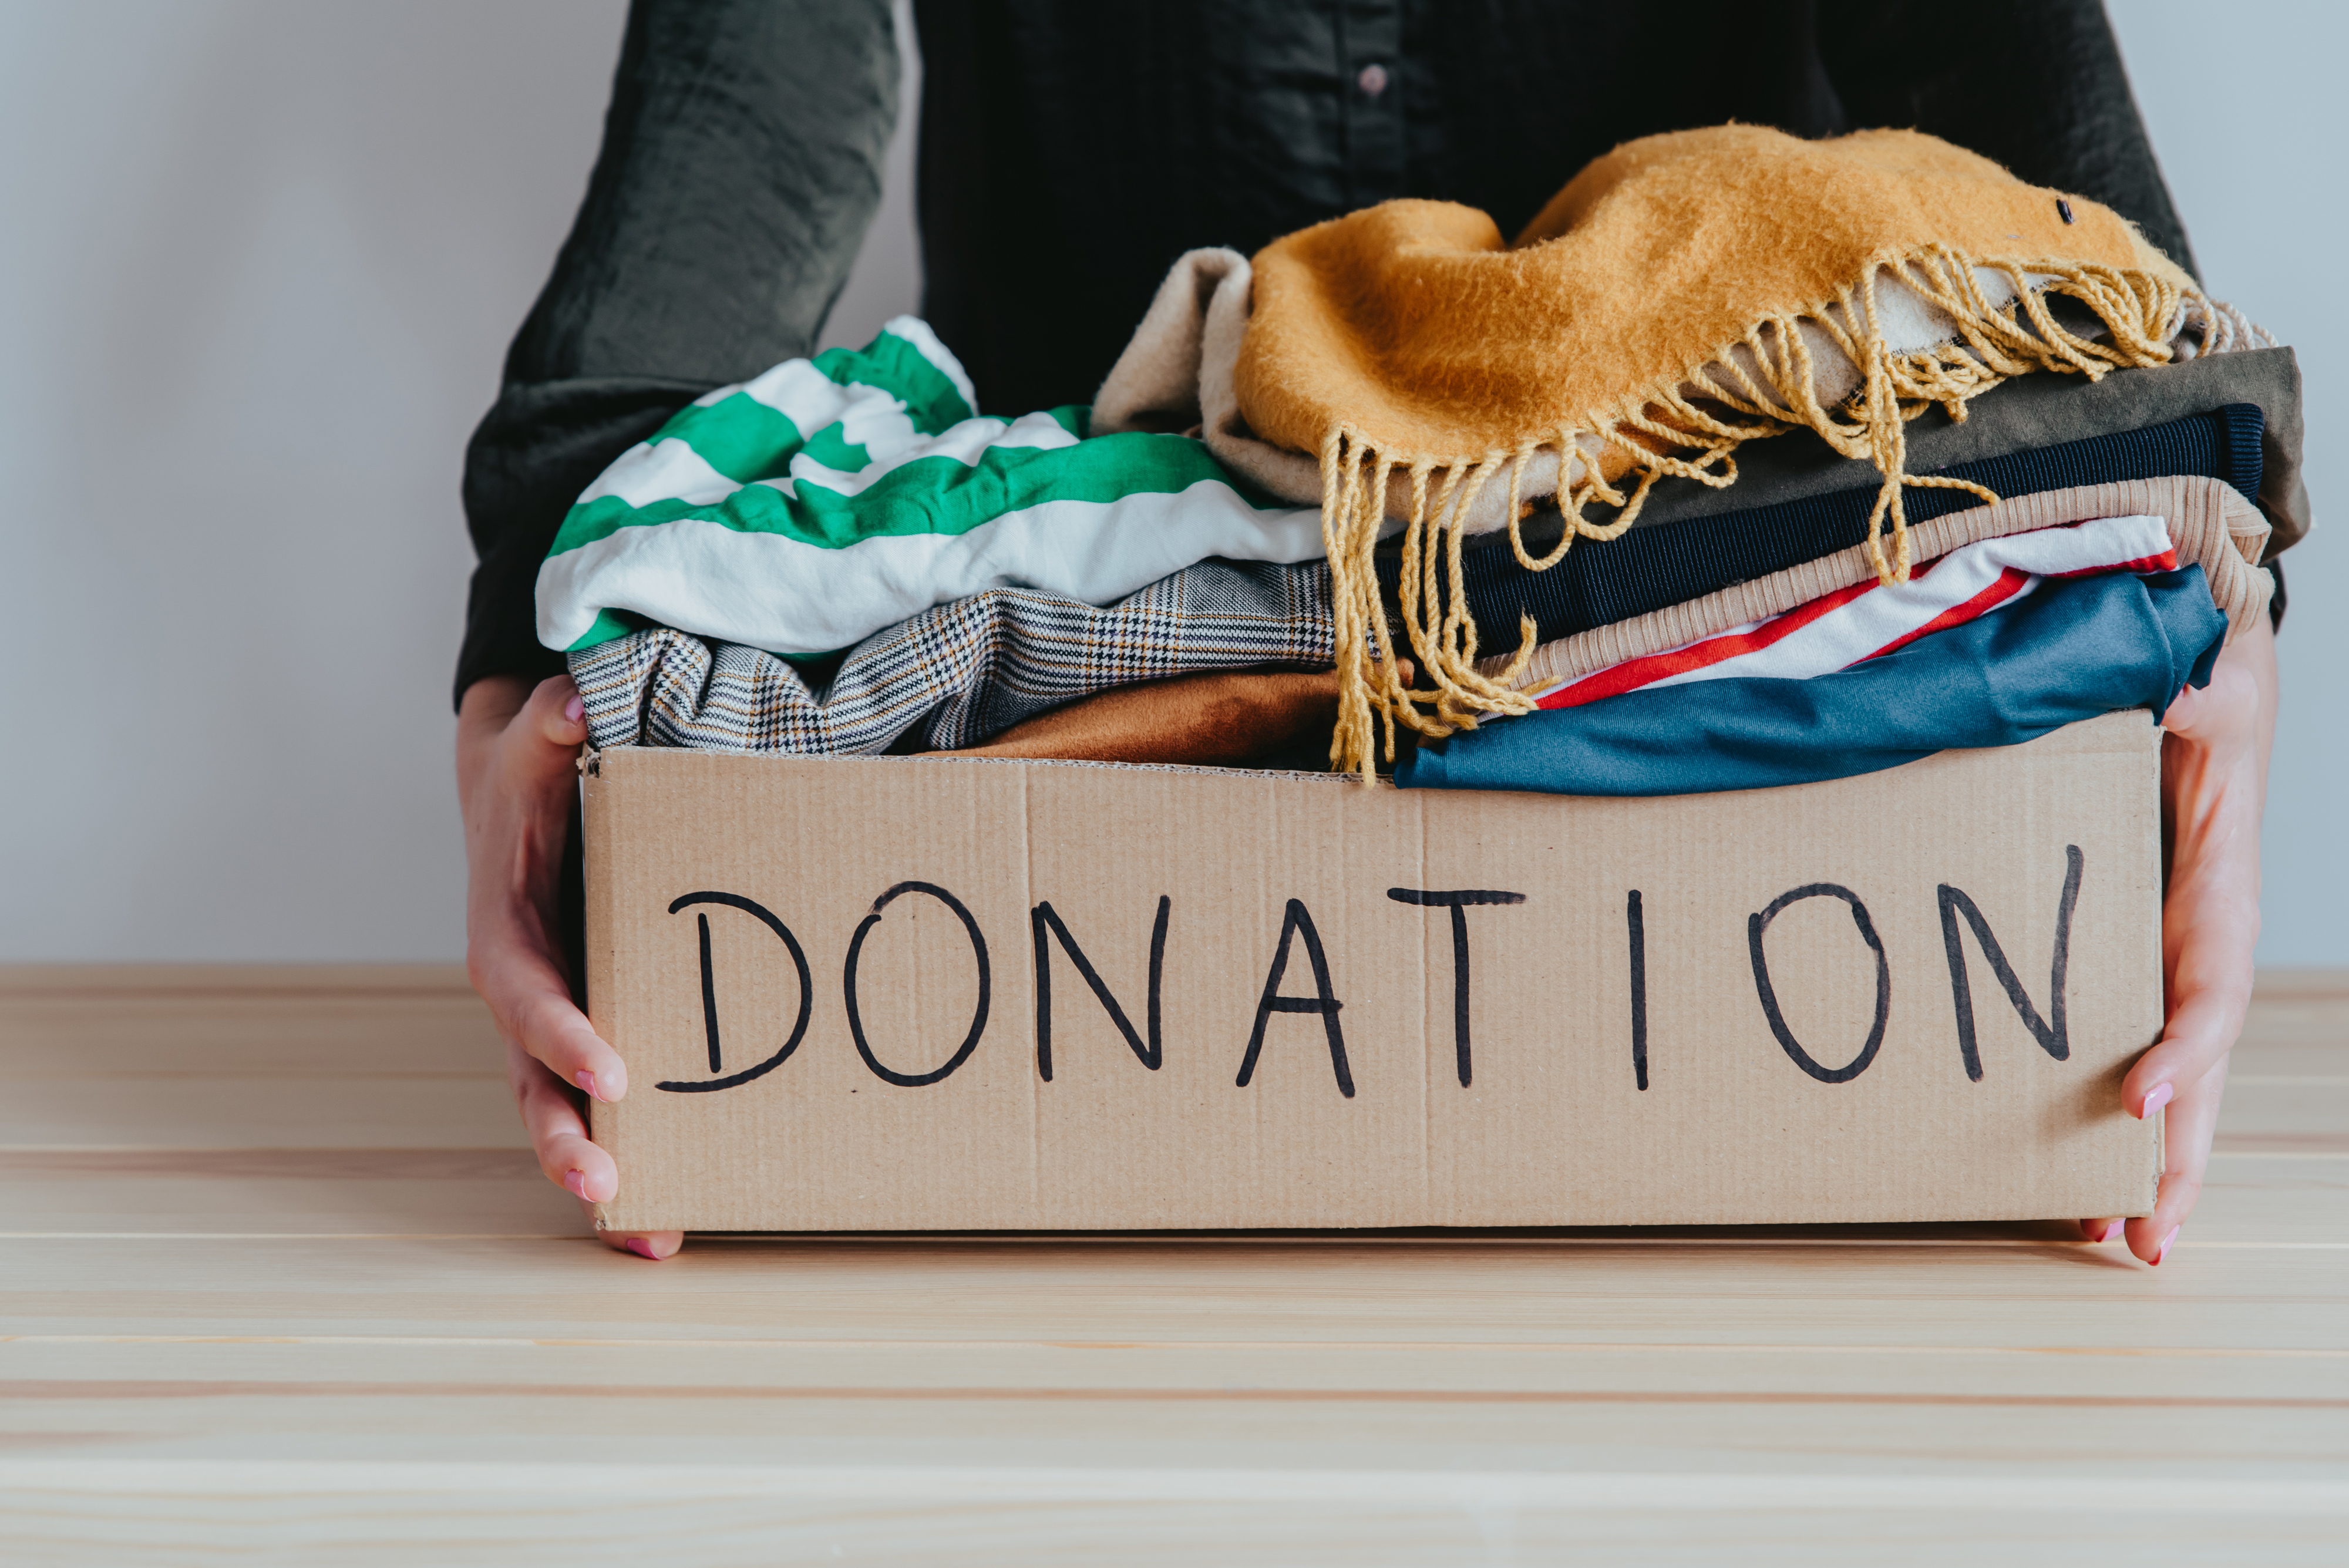 Person holding a cardboard box labeled &quot;DONATION&quot; filled with various folded clothes